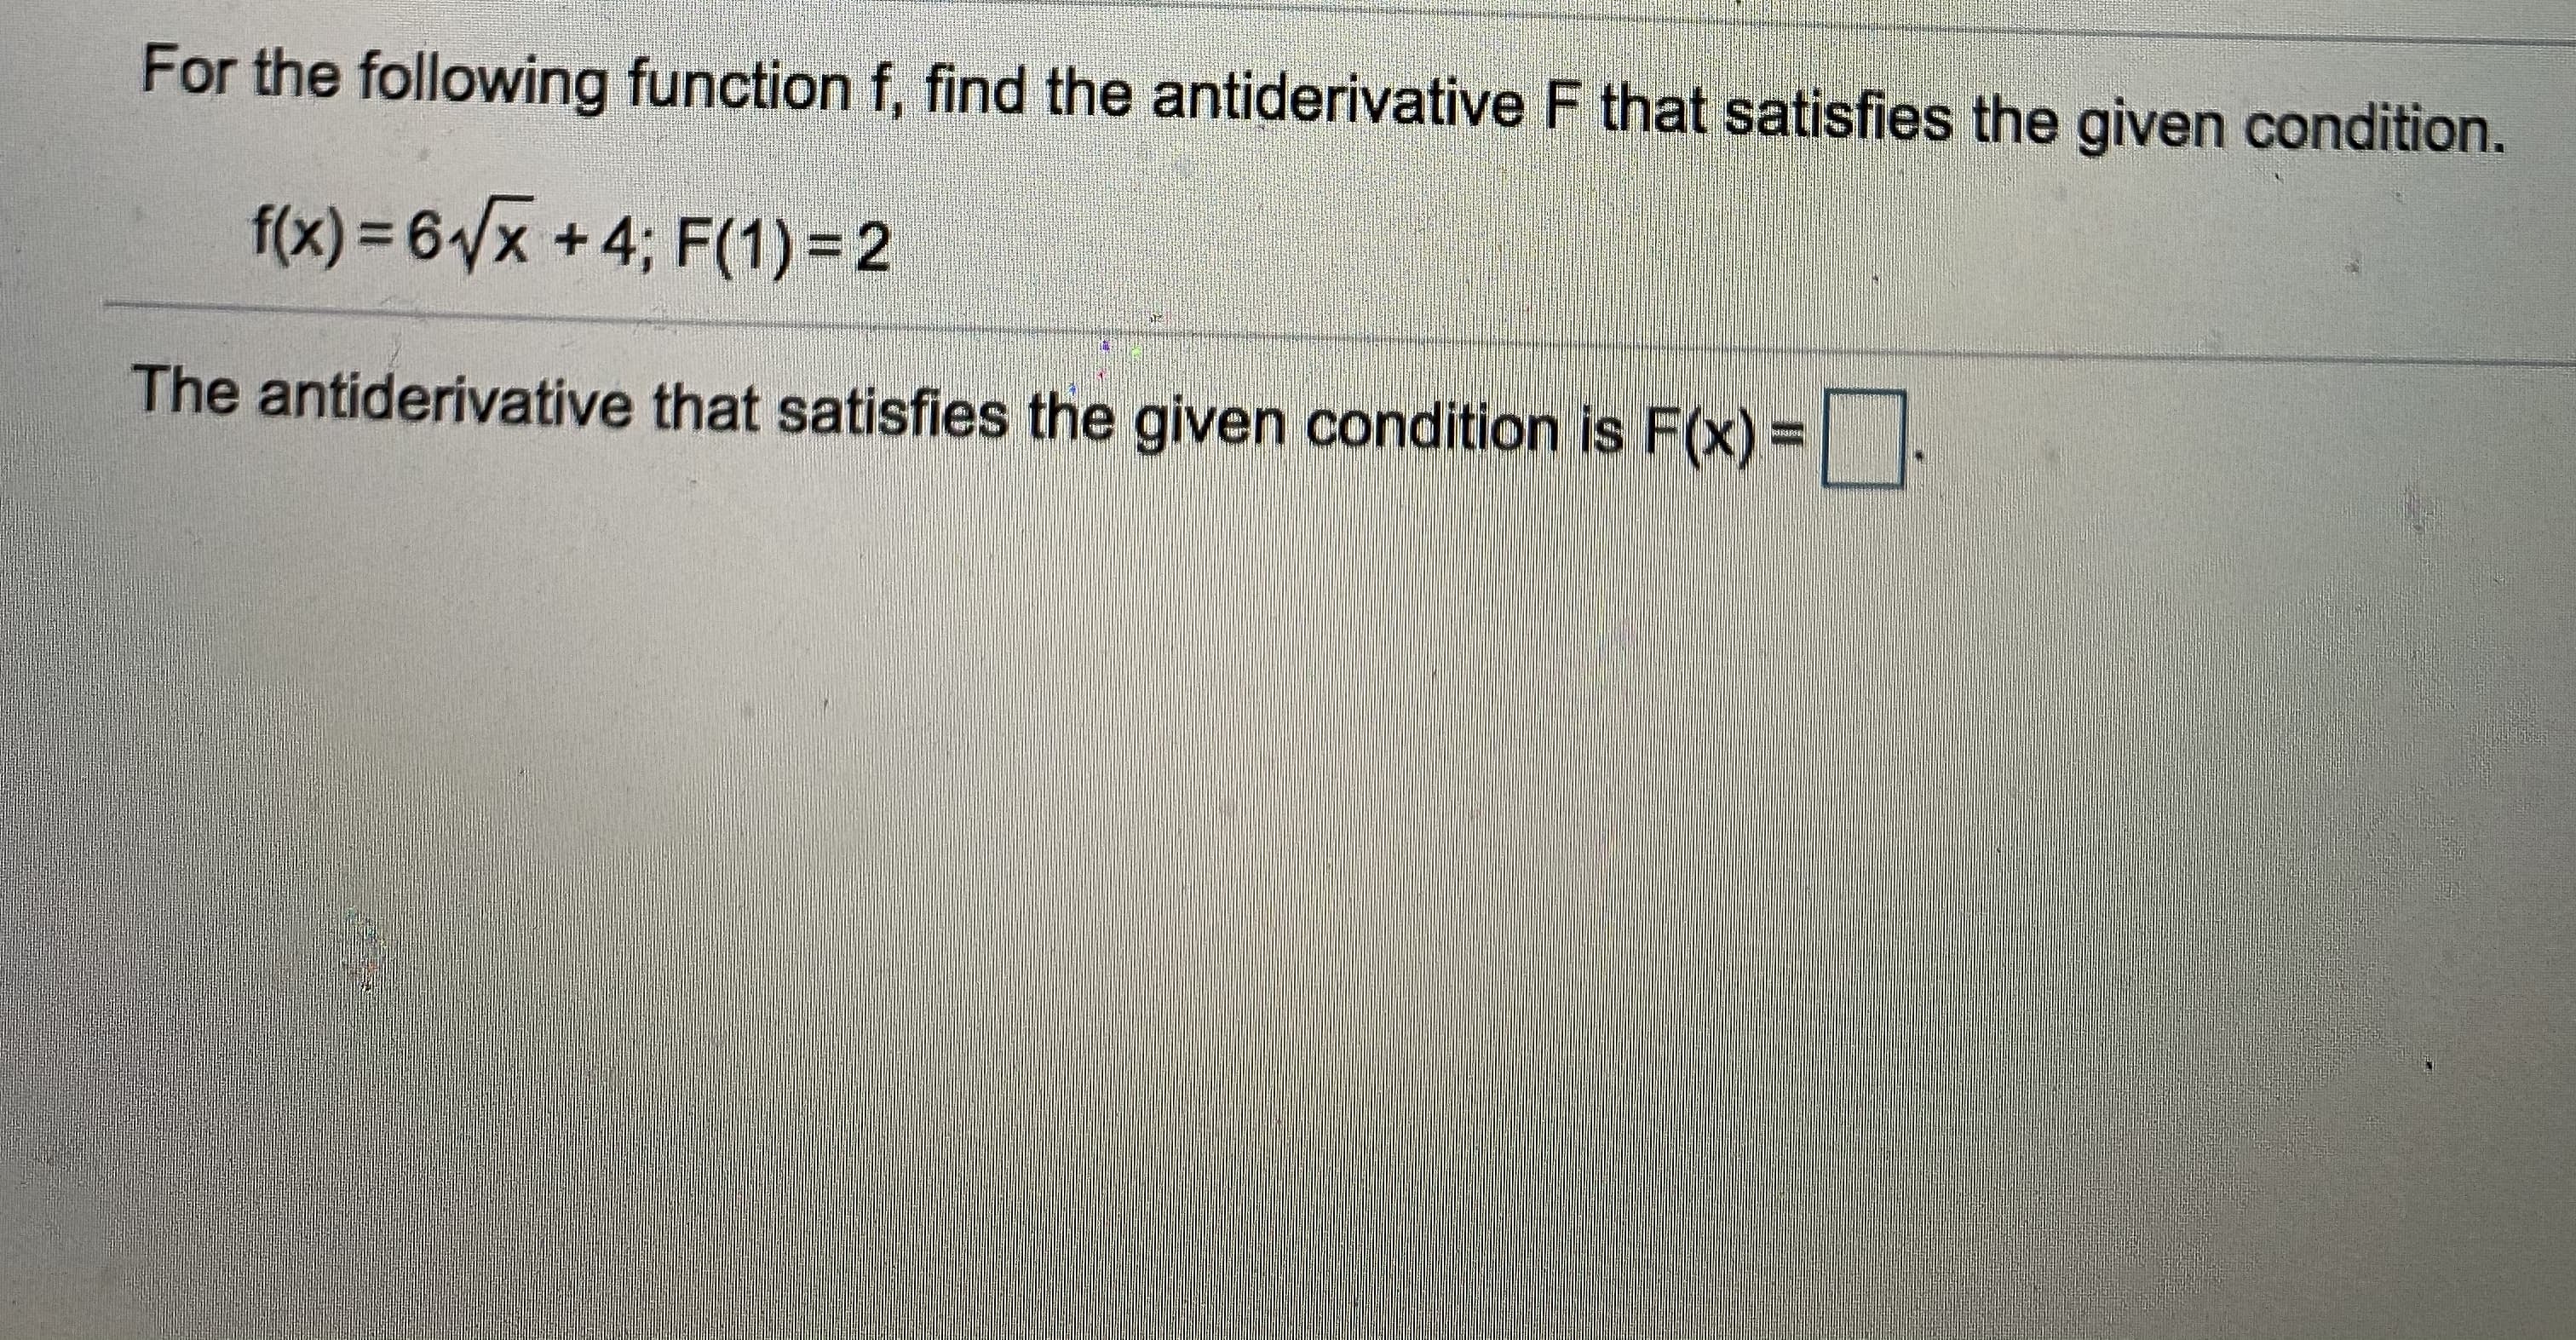 For the following function f, find the antiderivative F that satisfies the given condition.
f(x) = 61/x +4; F(1) = 2
The antiderivative that satisfies the given condition is F(x) =.
